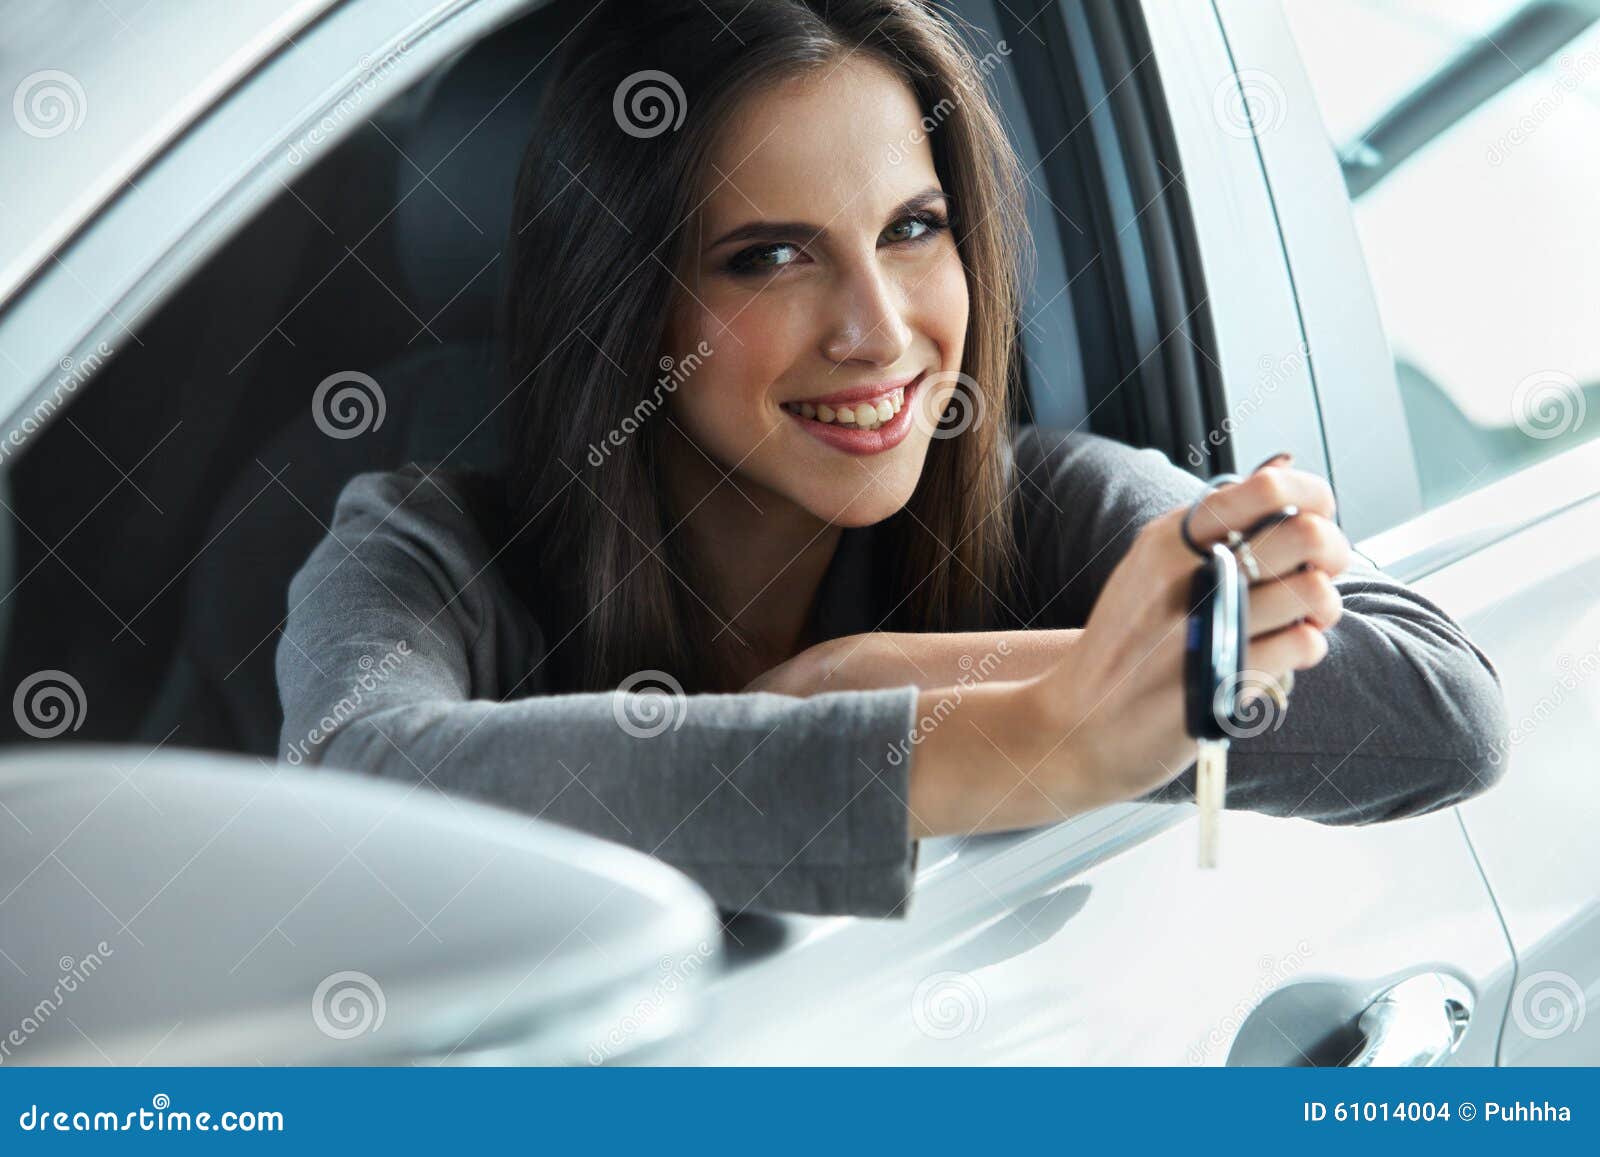 woman driver holding car keys siting in her new car.